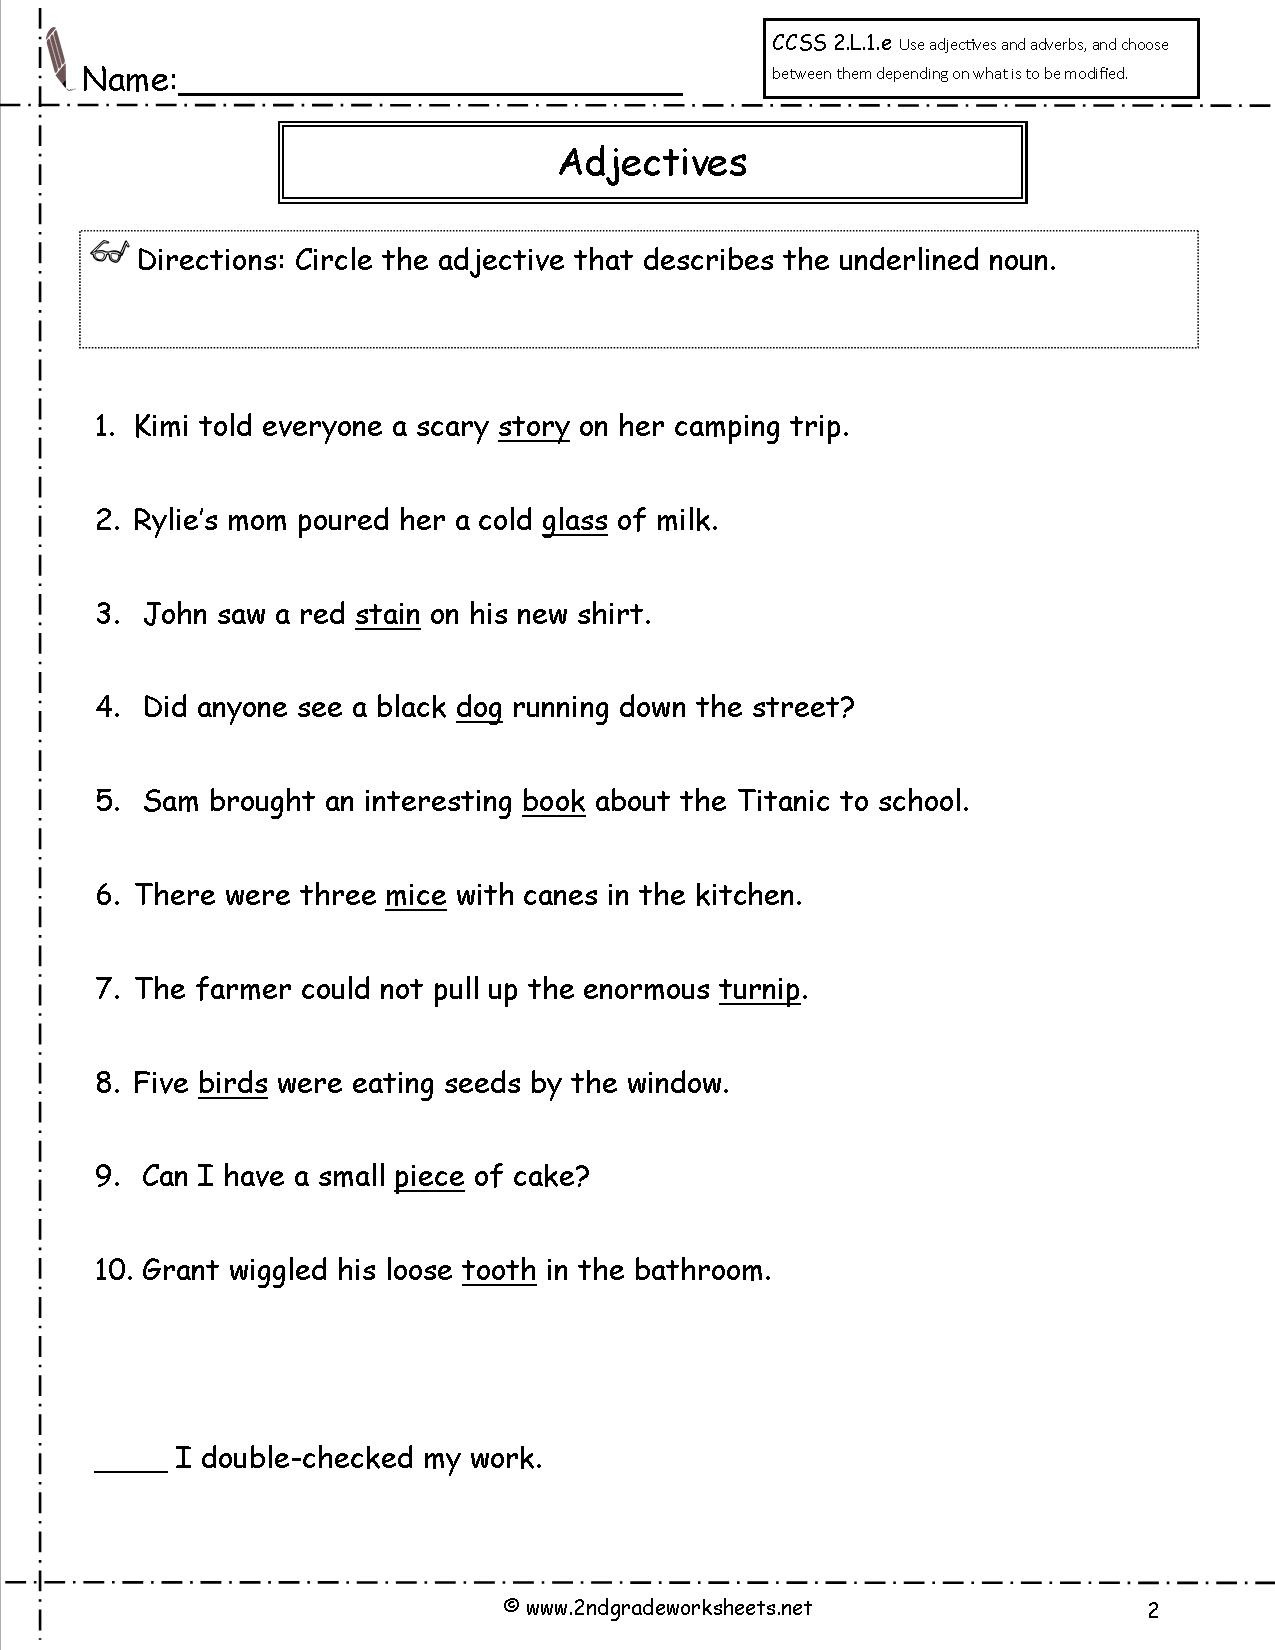 Free Using Adjectives And Adverbs Worksheets